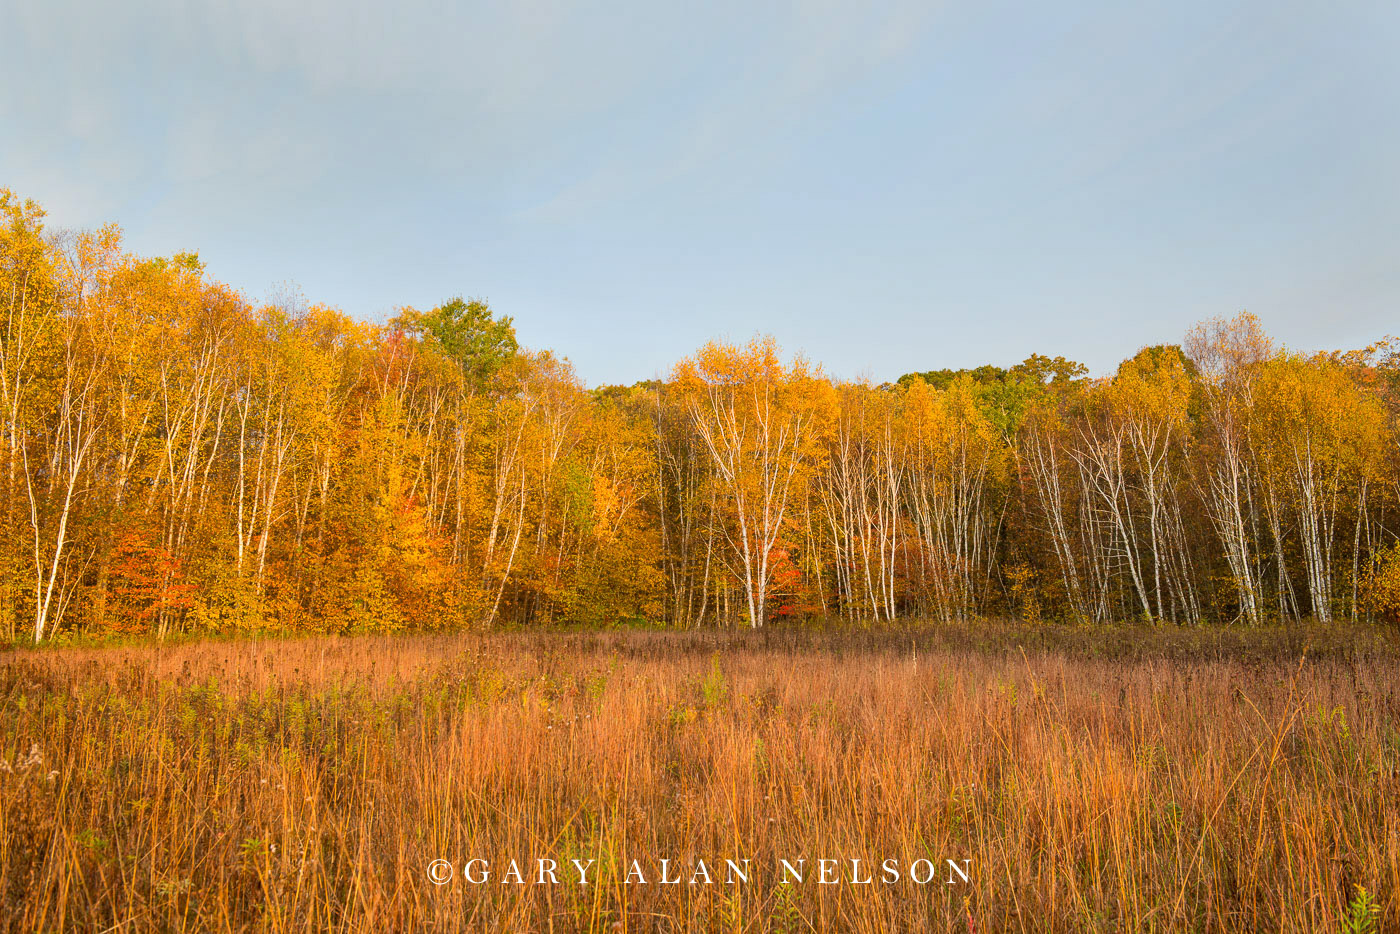 Woods and prairie in autumn near the St. Croix River, Wild River State Park, Minnesota